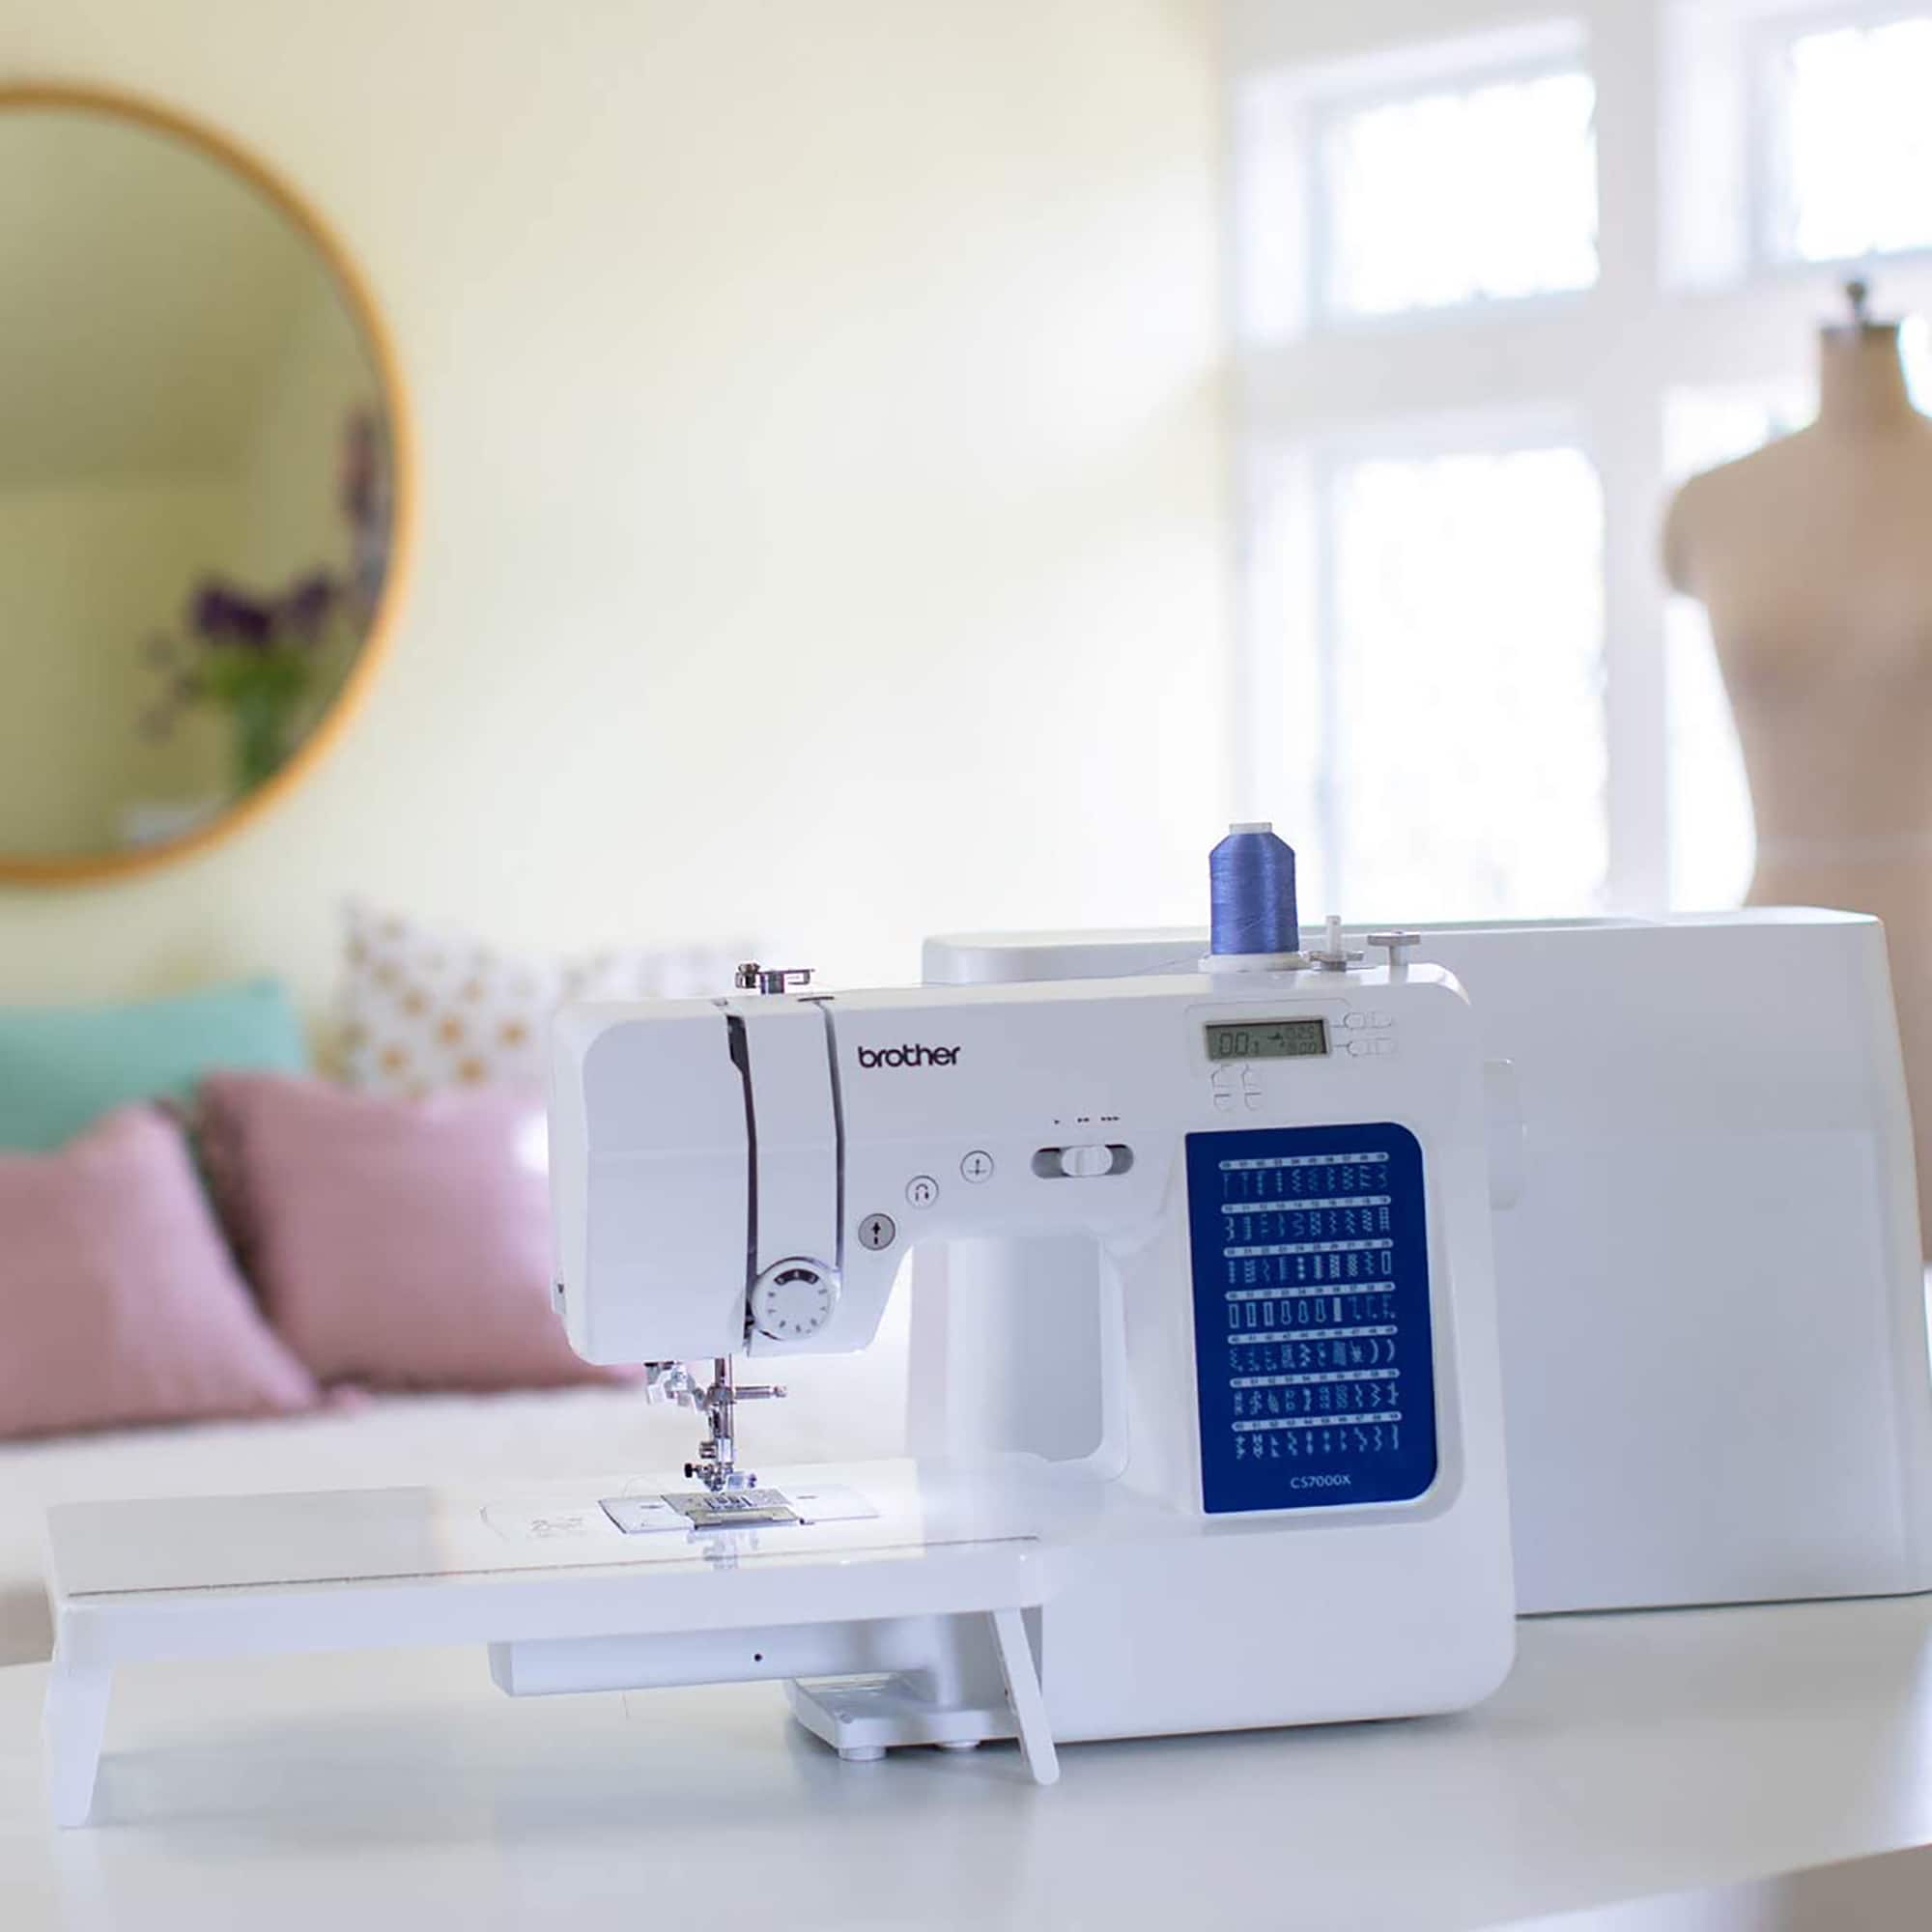 Brother 70 Stitch Computerized Wide Table Sewing Machine